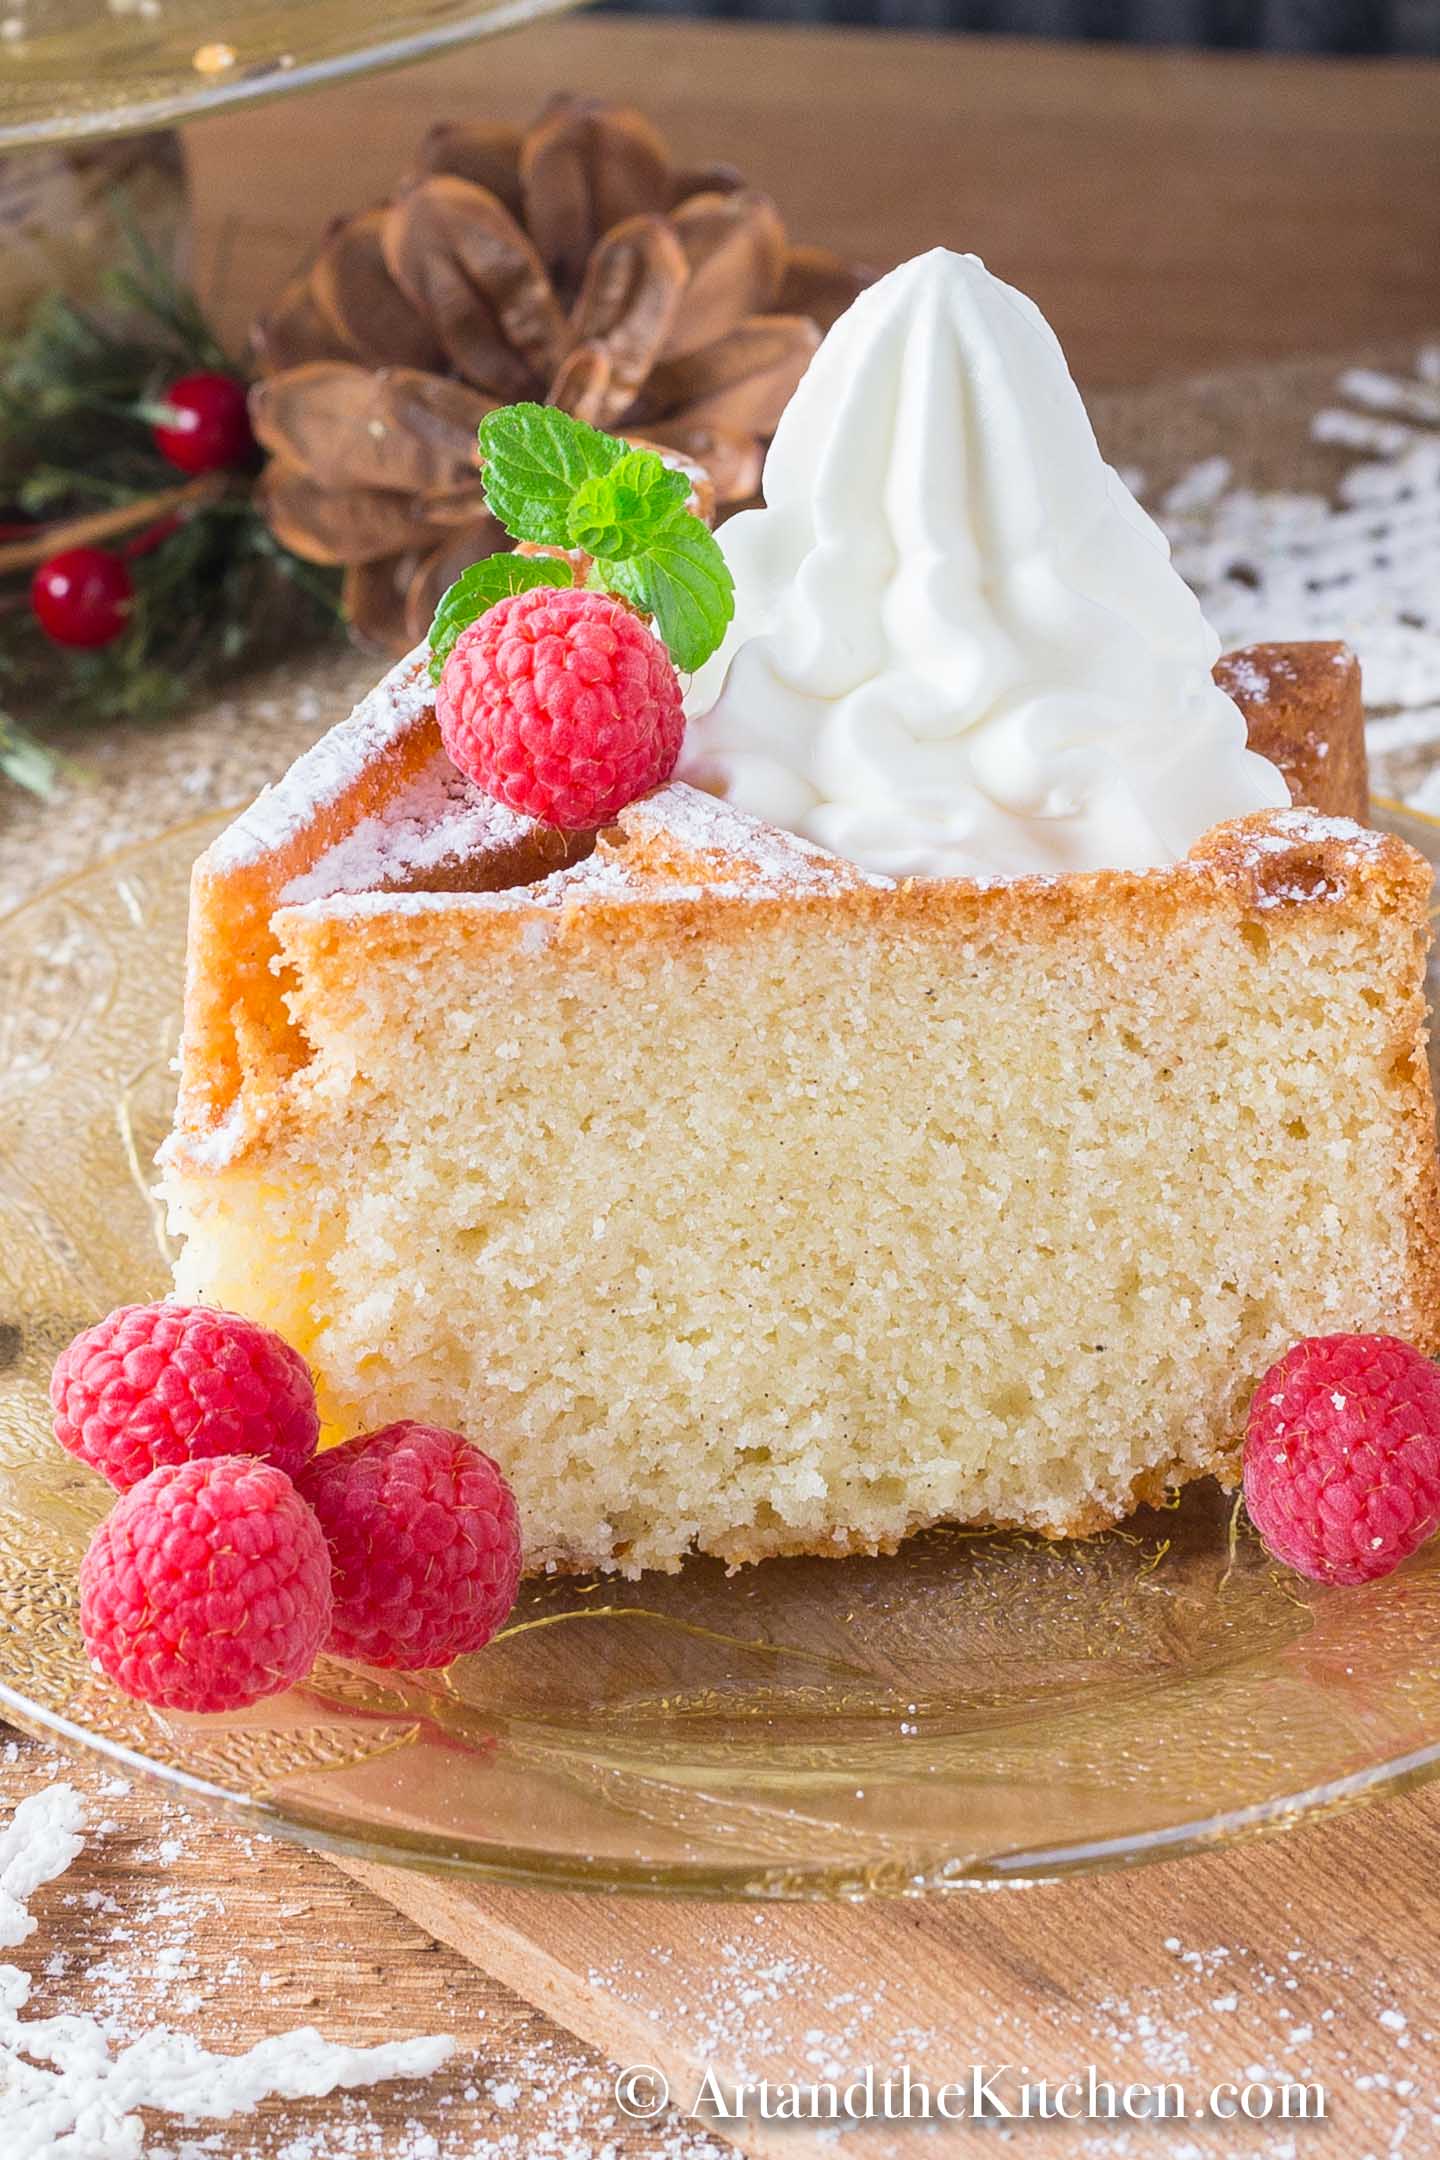 Slice of bundt cake made with eggnog, topped with whipped cream and fresh raspberries.